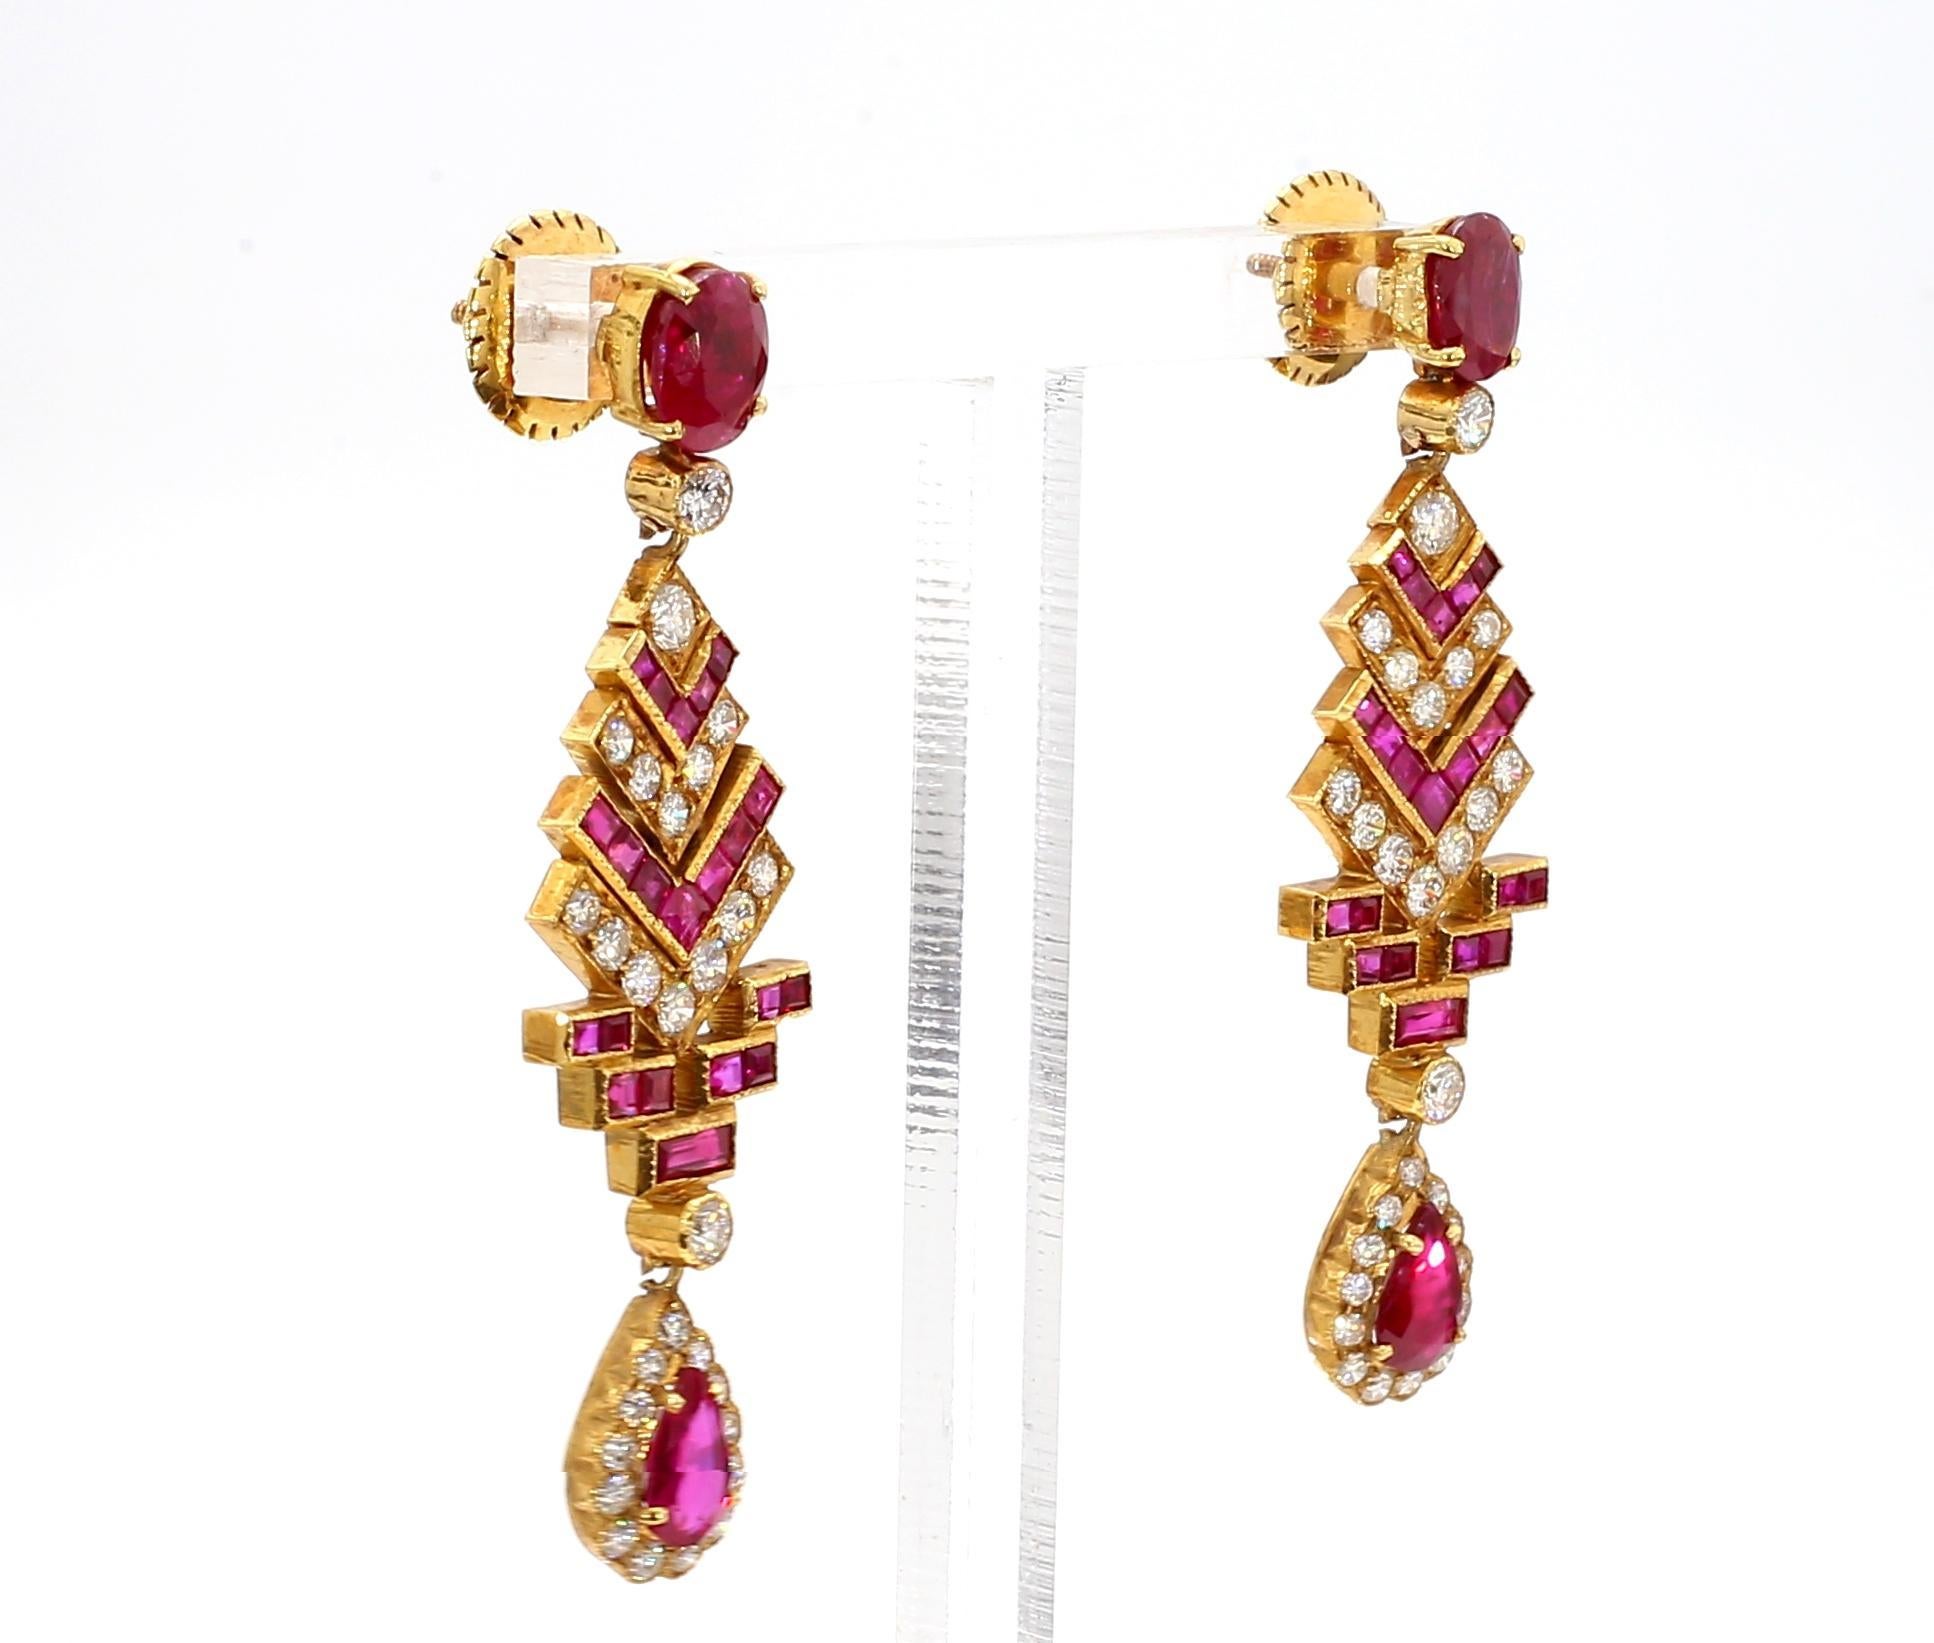 4 Carat Ruby and 3 Carat Diamond Art Deco Style 14K Earrings For Sale 3